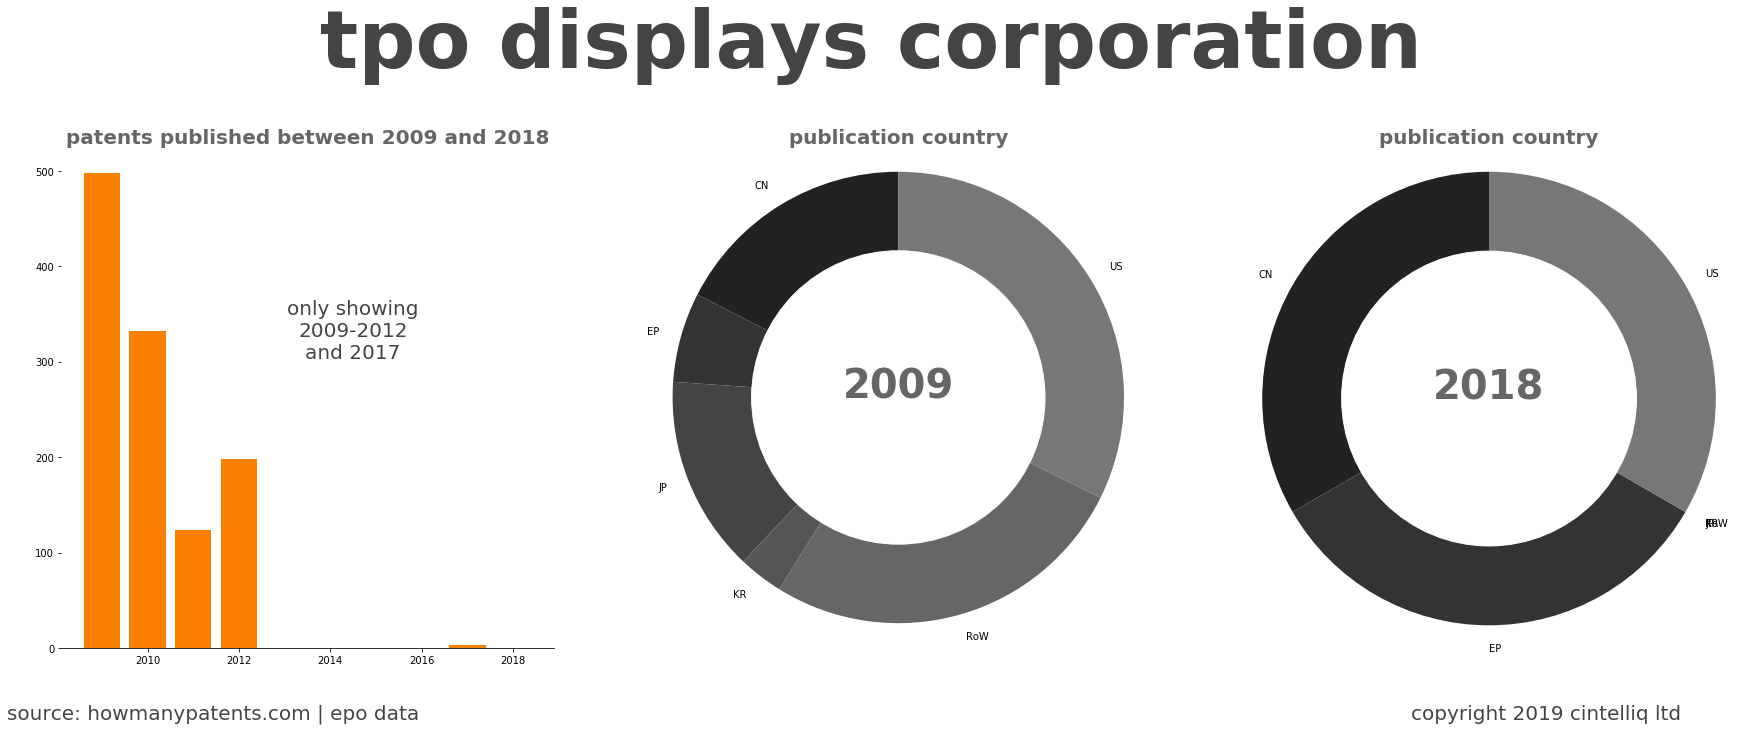 summary of patents for Tpo Displays Corporation